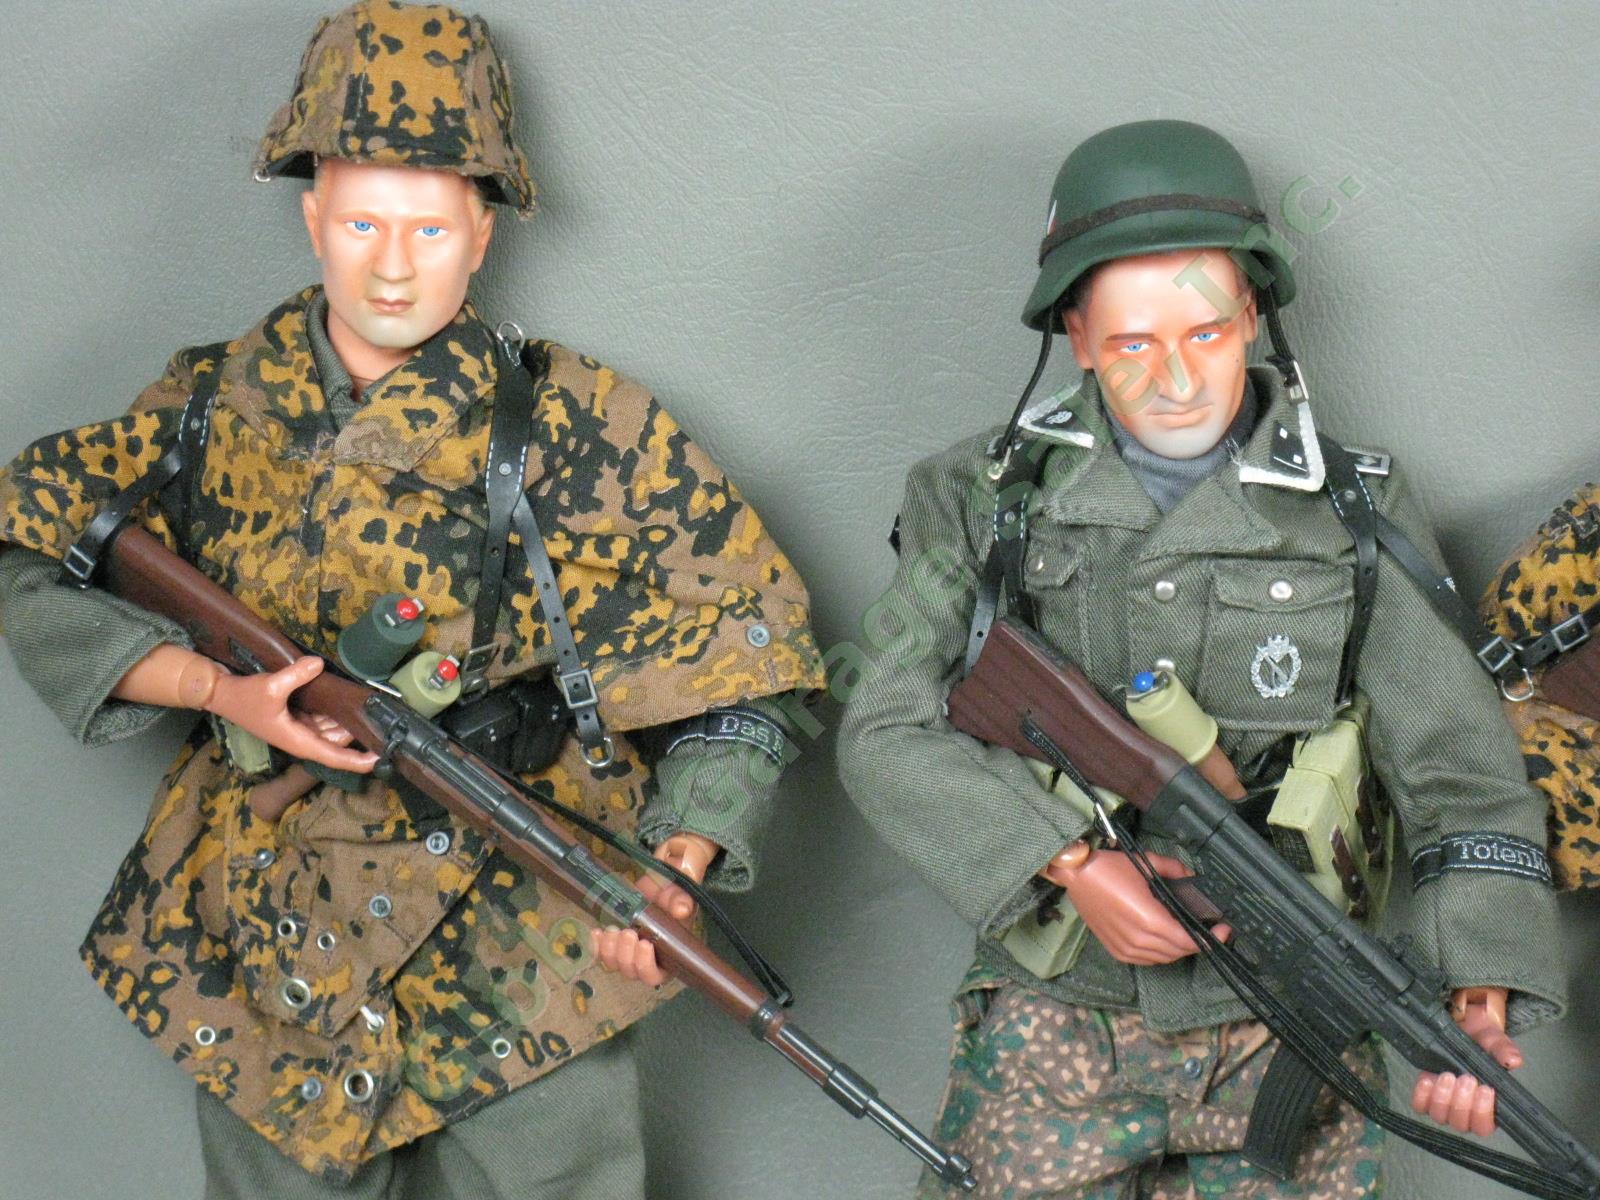 6 Dragon 1/6 Scale 12" WWII German Camo Army Soldier Figures Lot w/Accessories 3